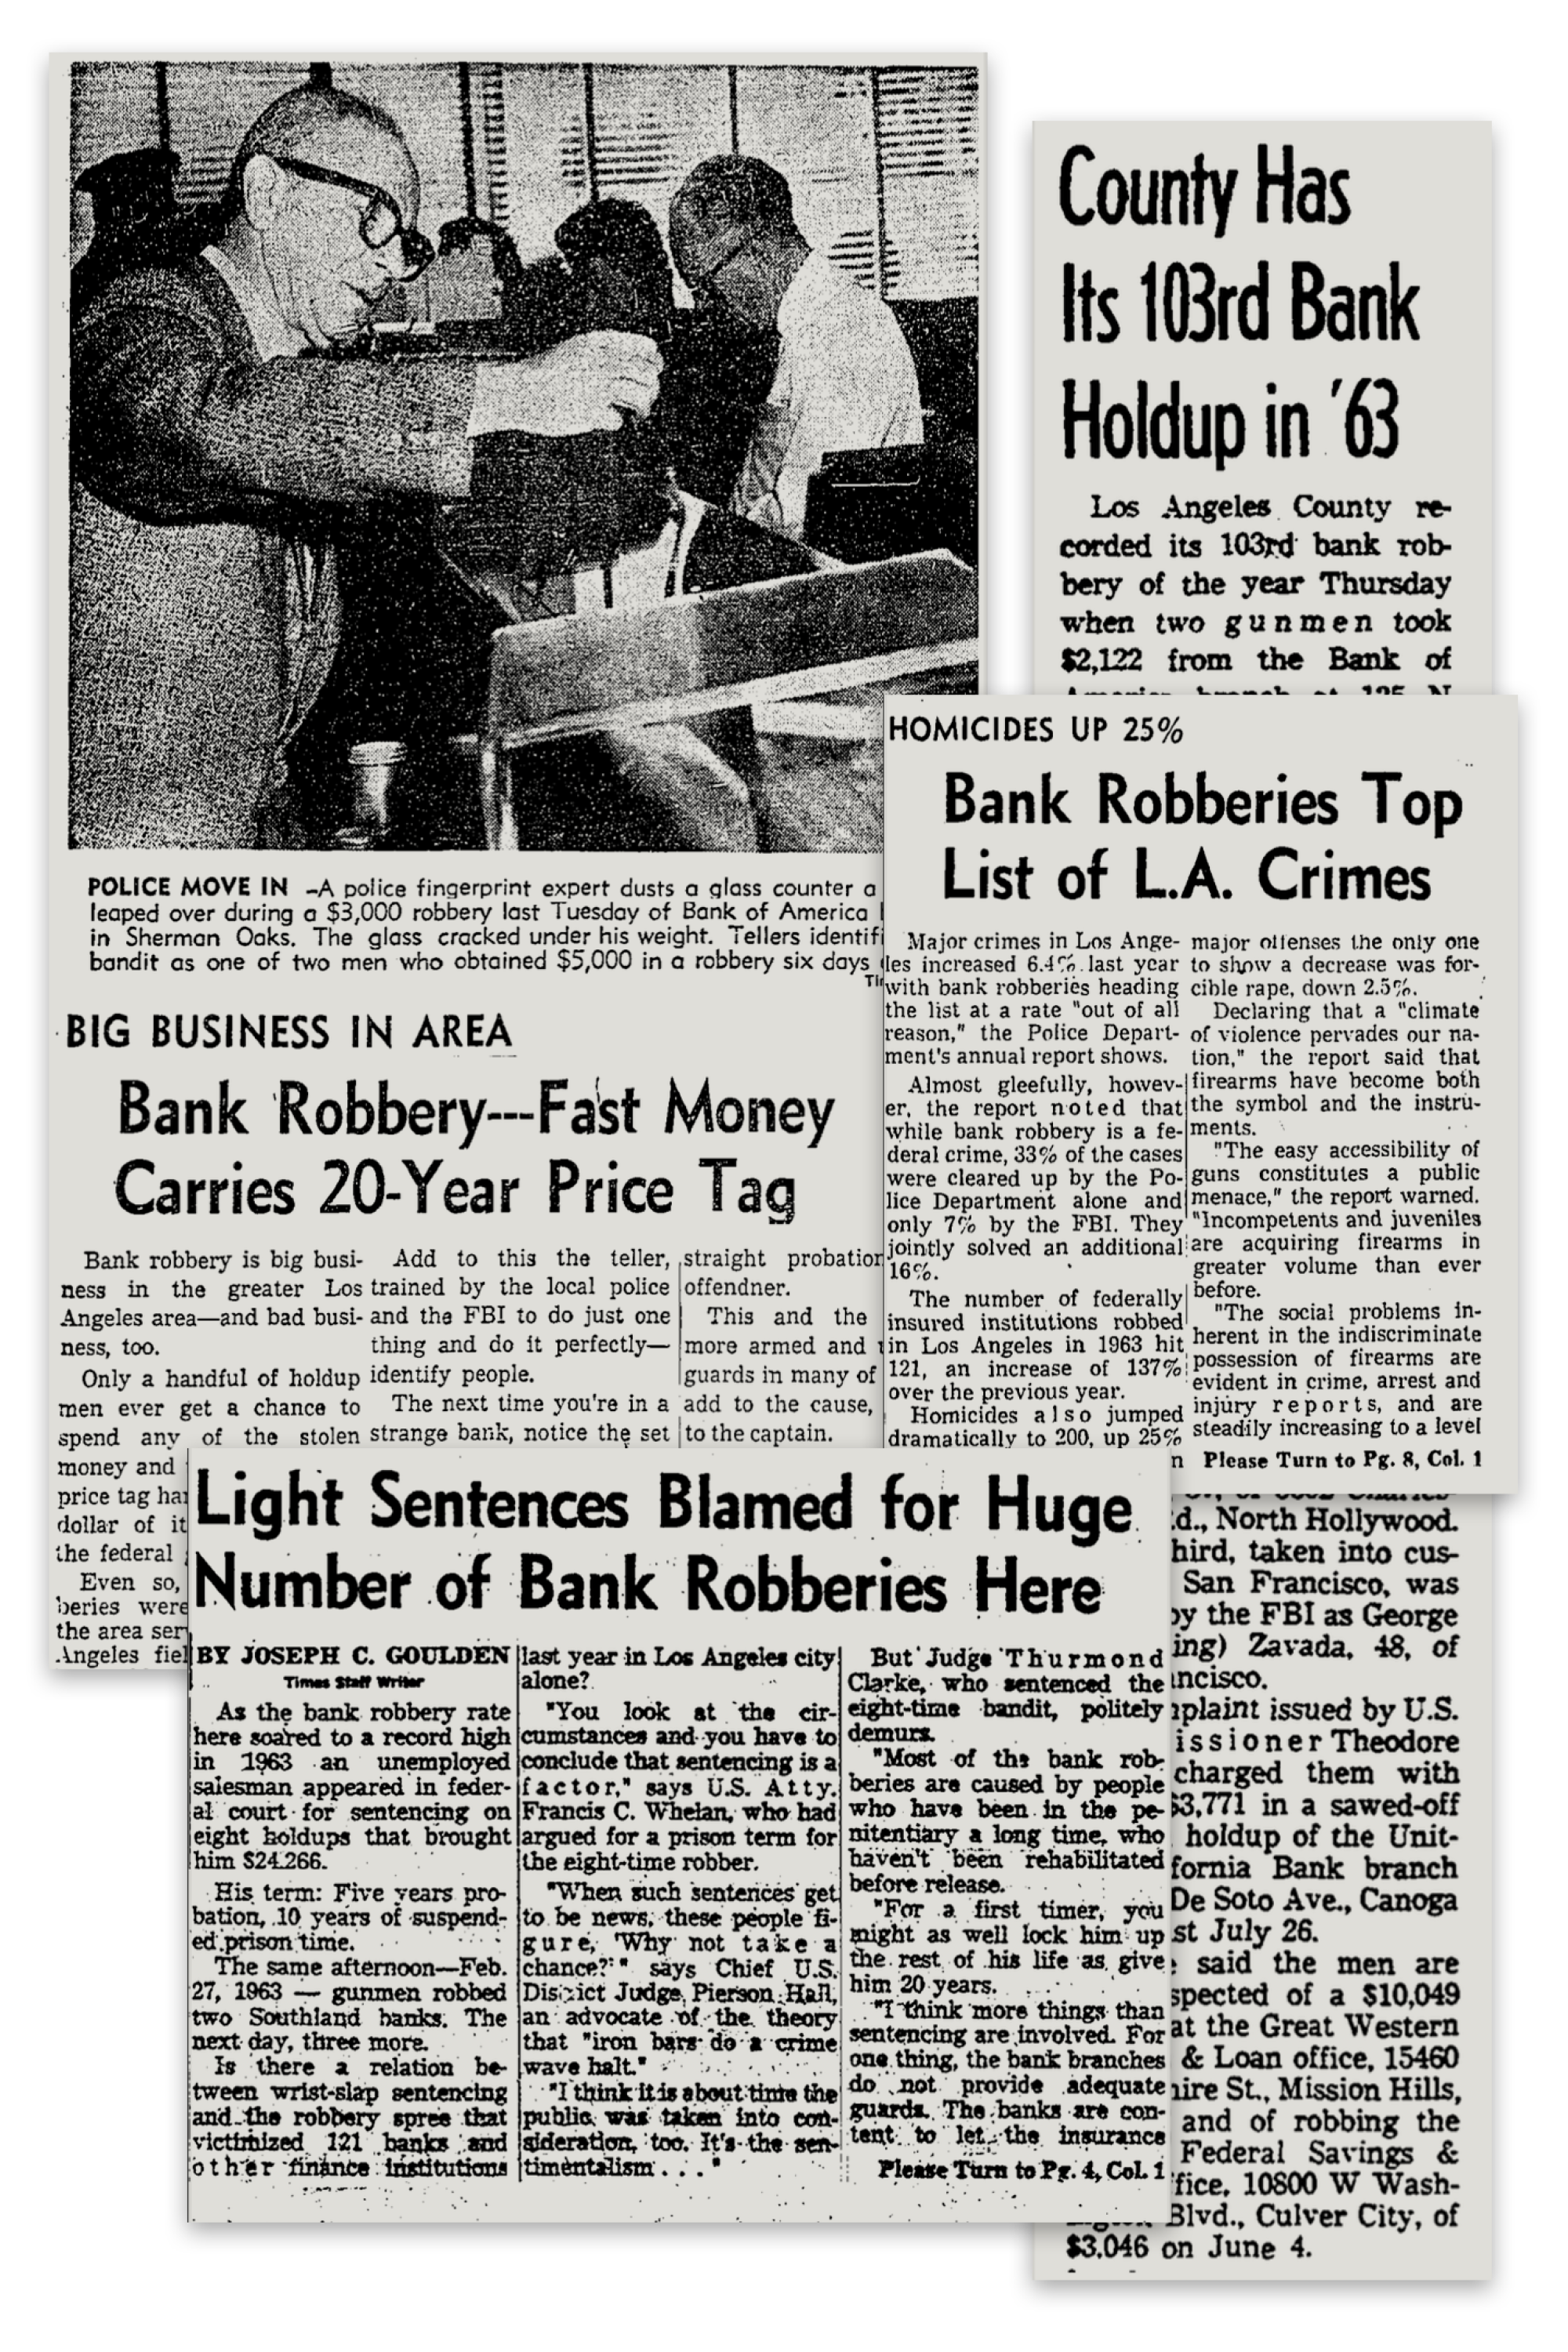 Some of the bank robberies that created headlines in the Los Angeles Times in the 1960s.